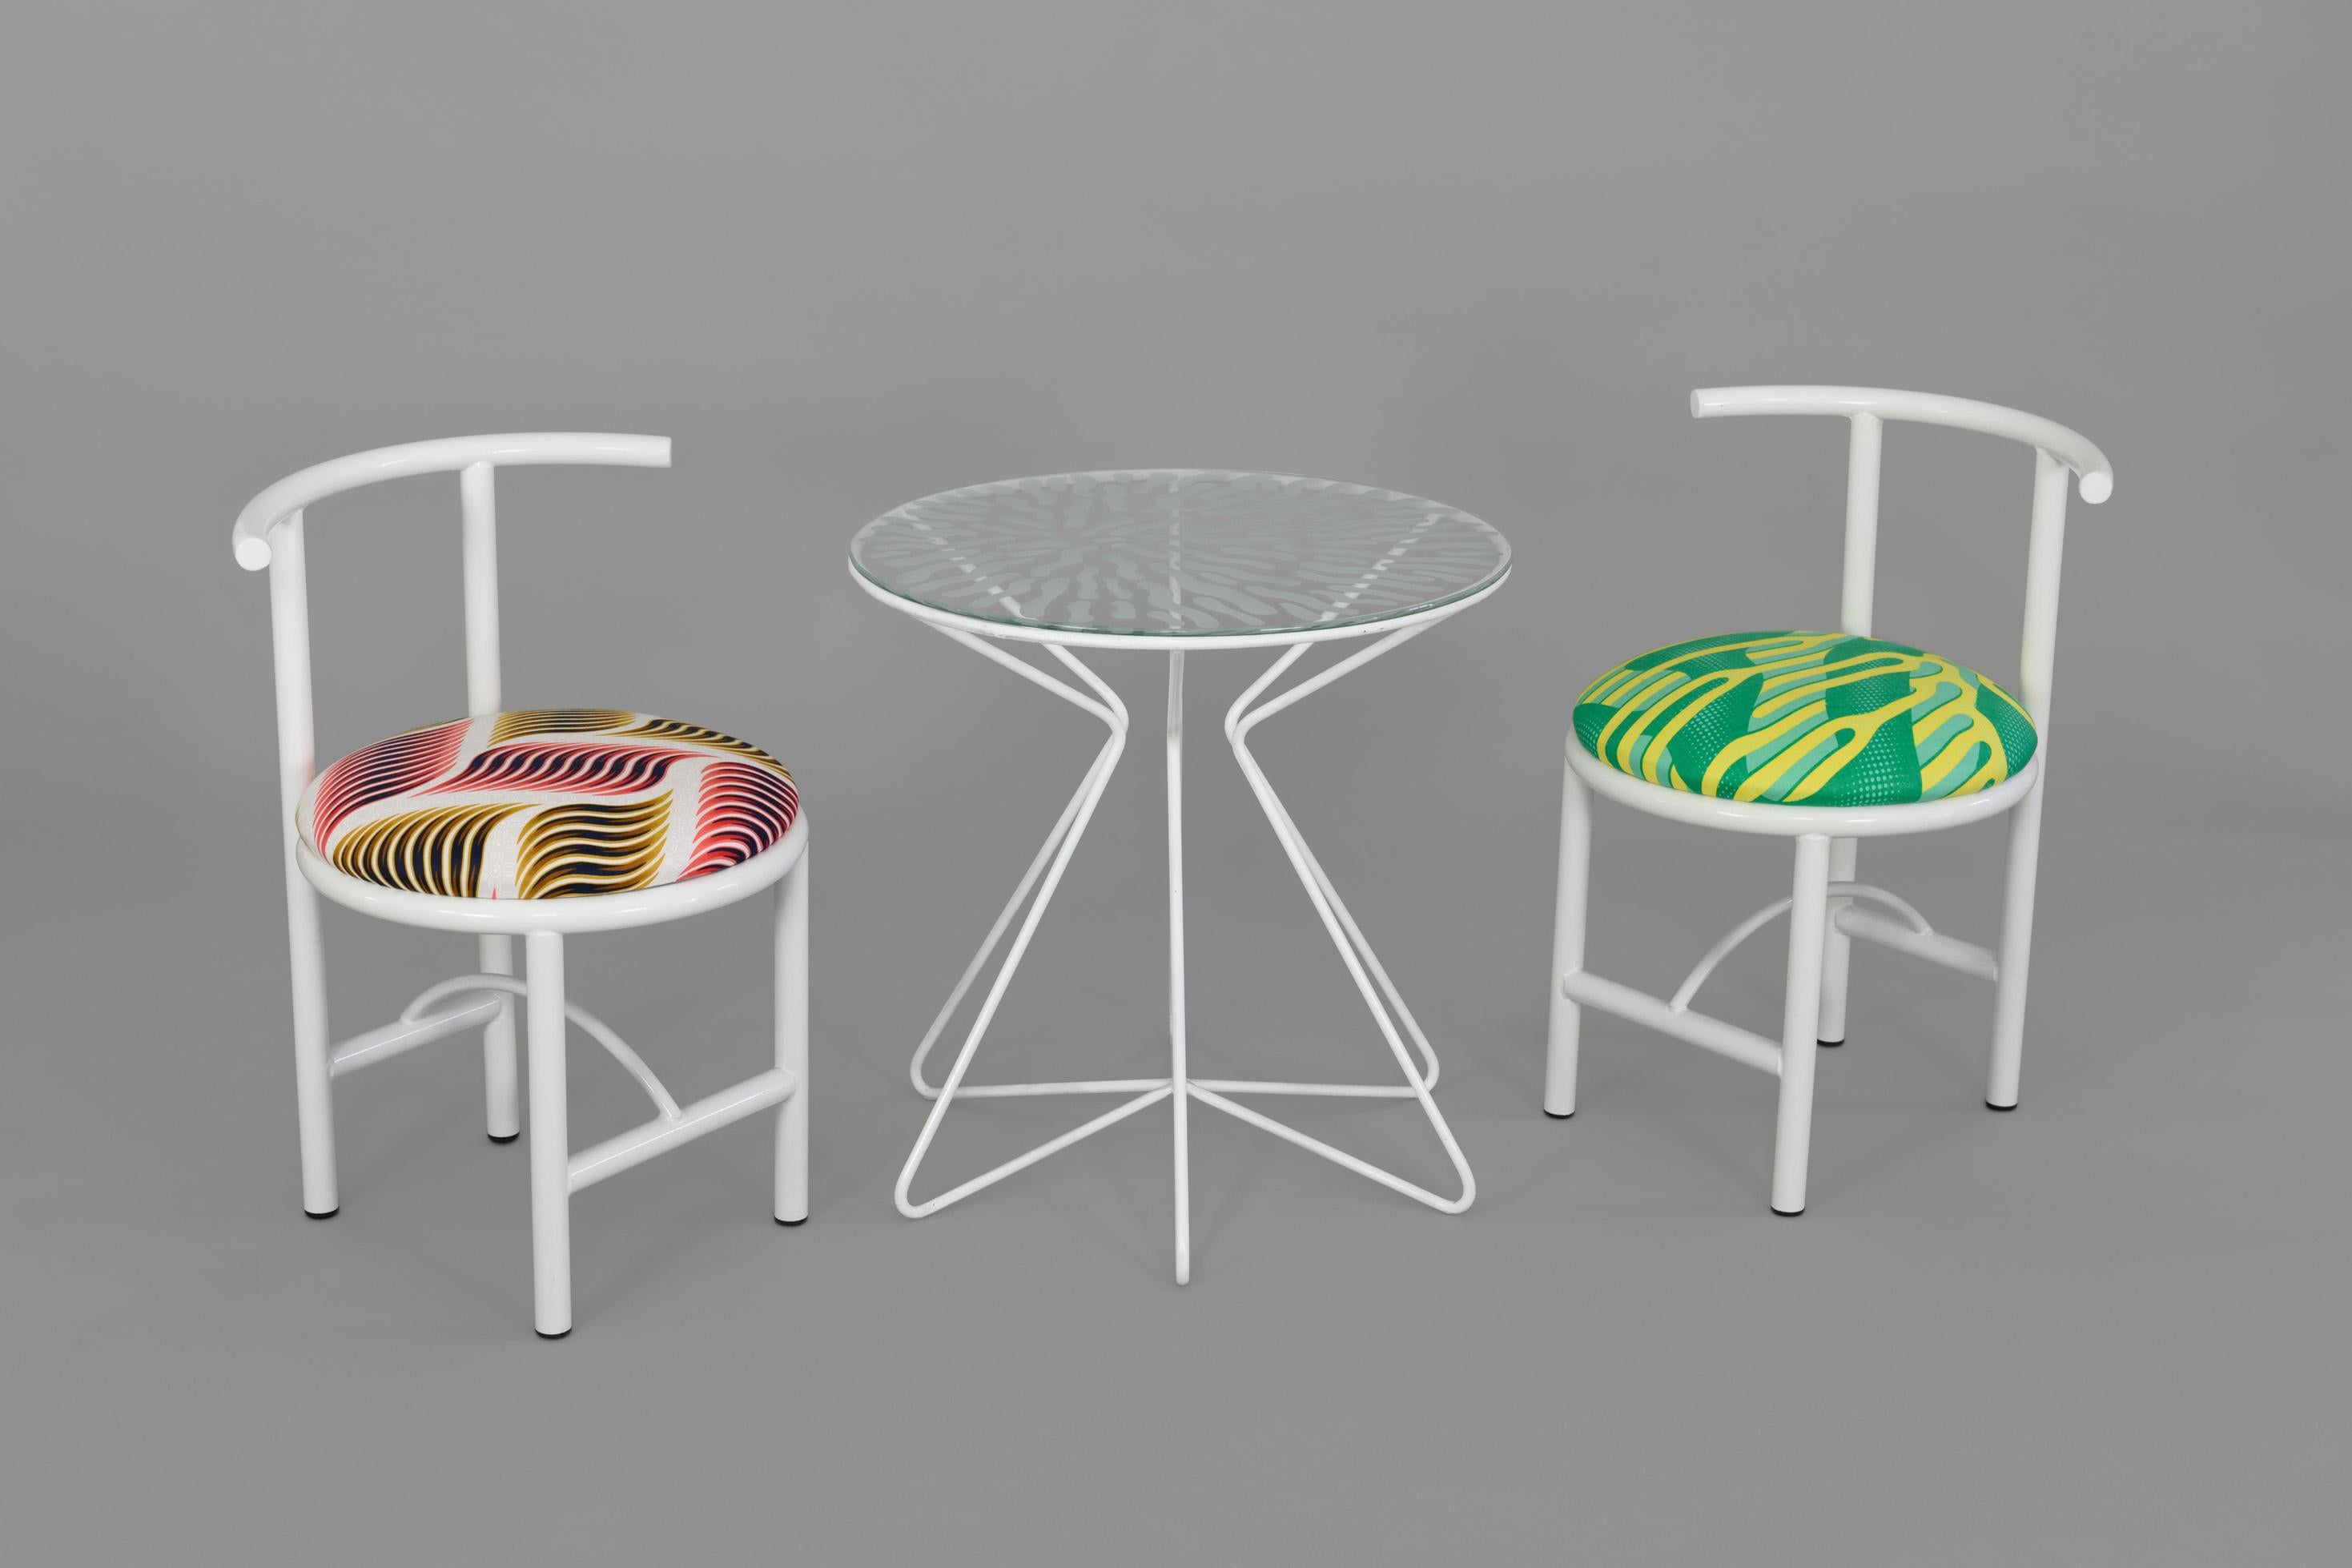 Welded Duo Set, Diner Metal Chair, Colorful Textile, Contemporary Style For Sale